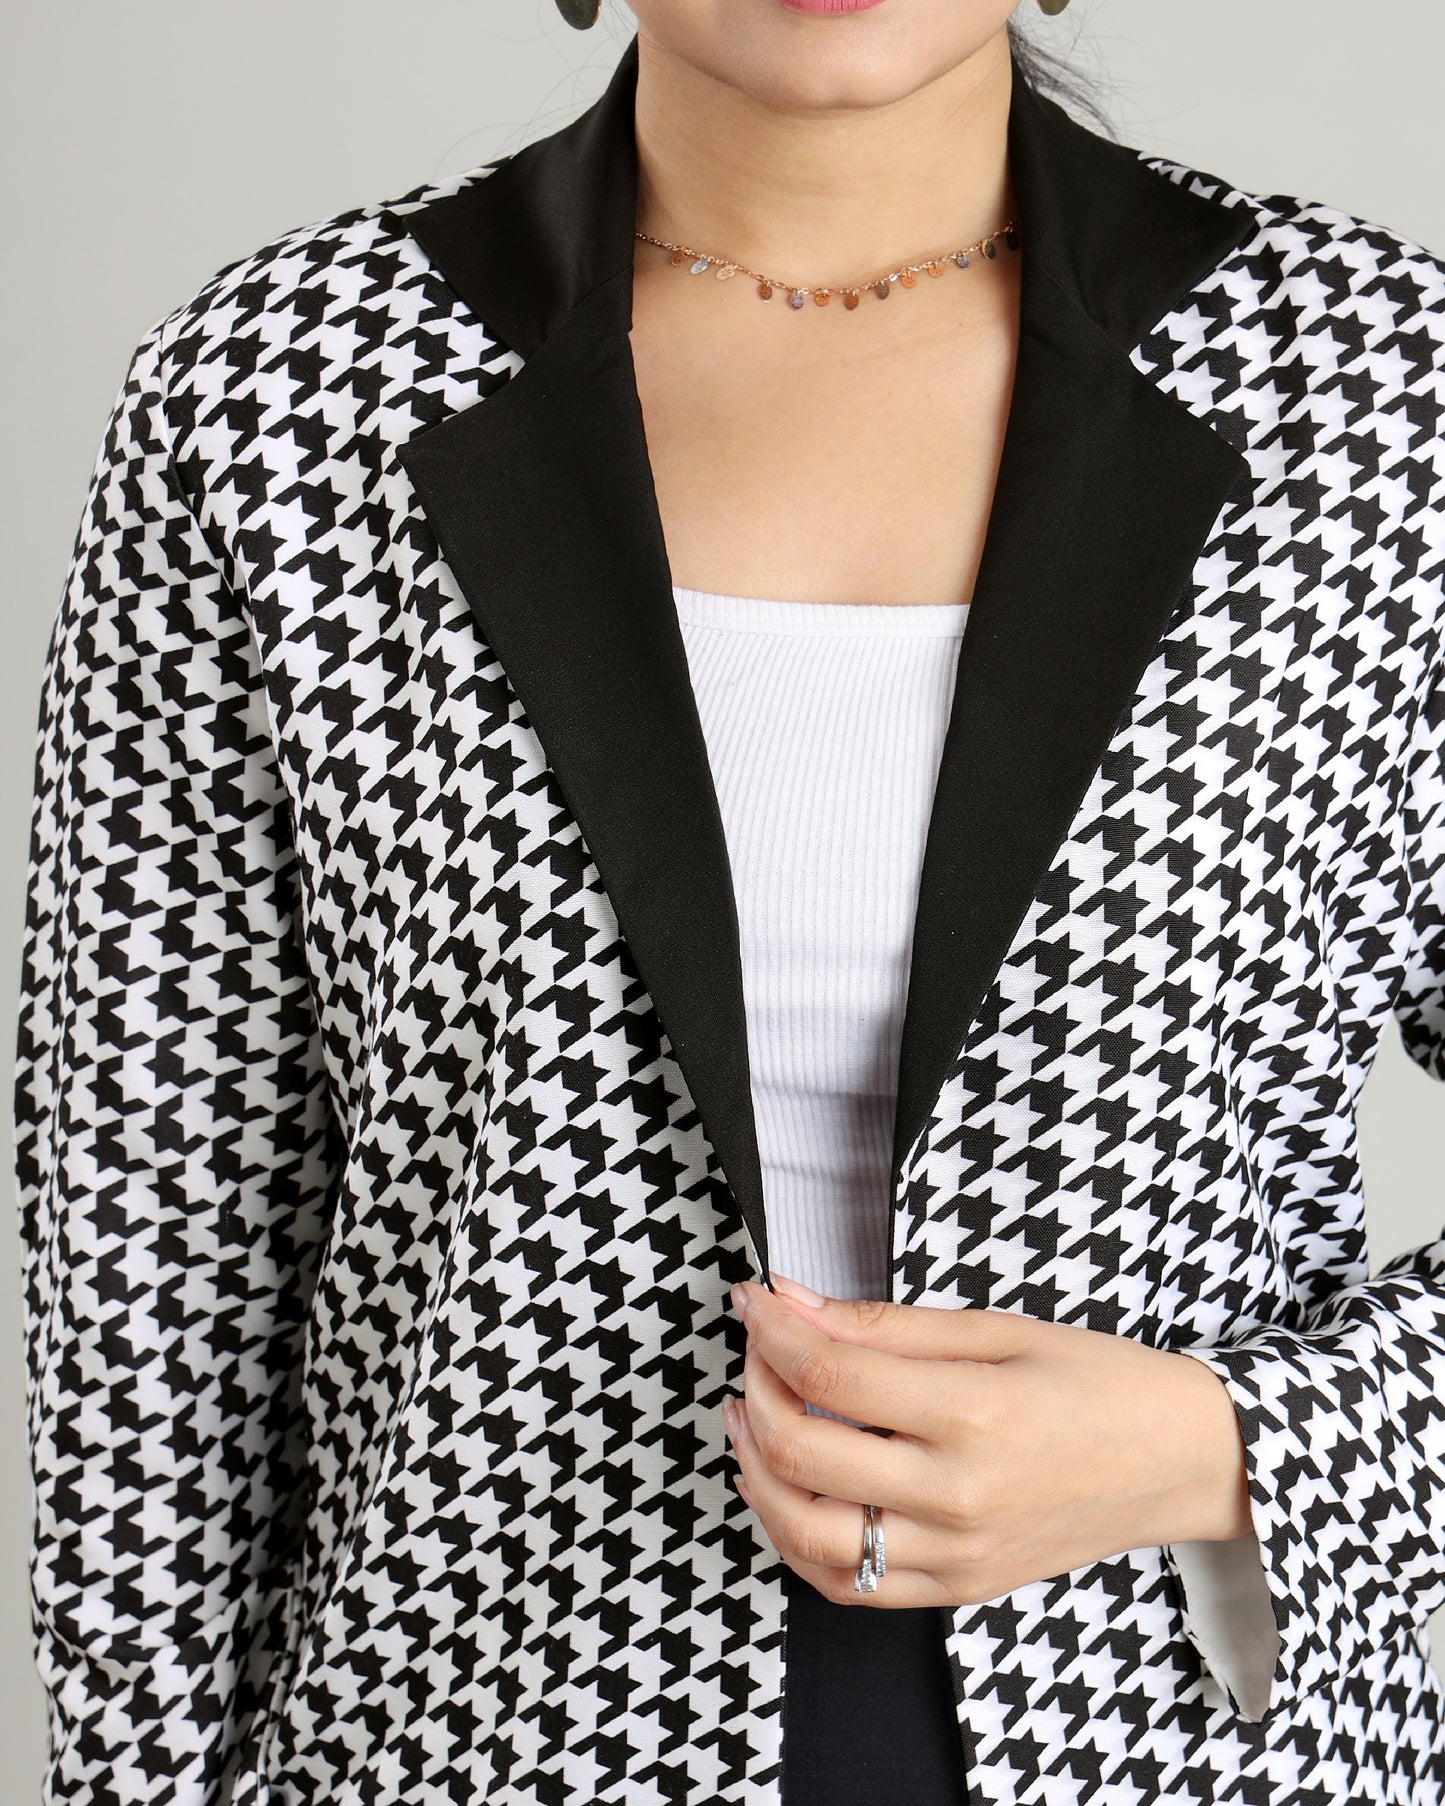 The One And Only: Black & White Patterned Jacket